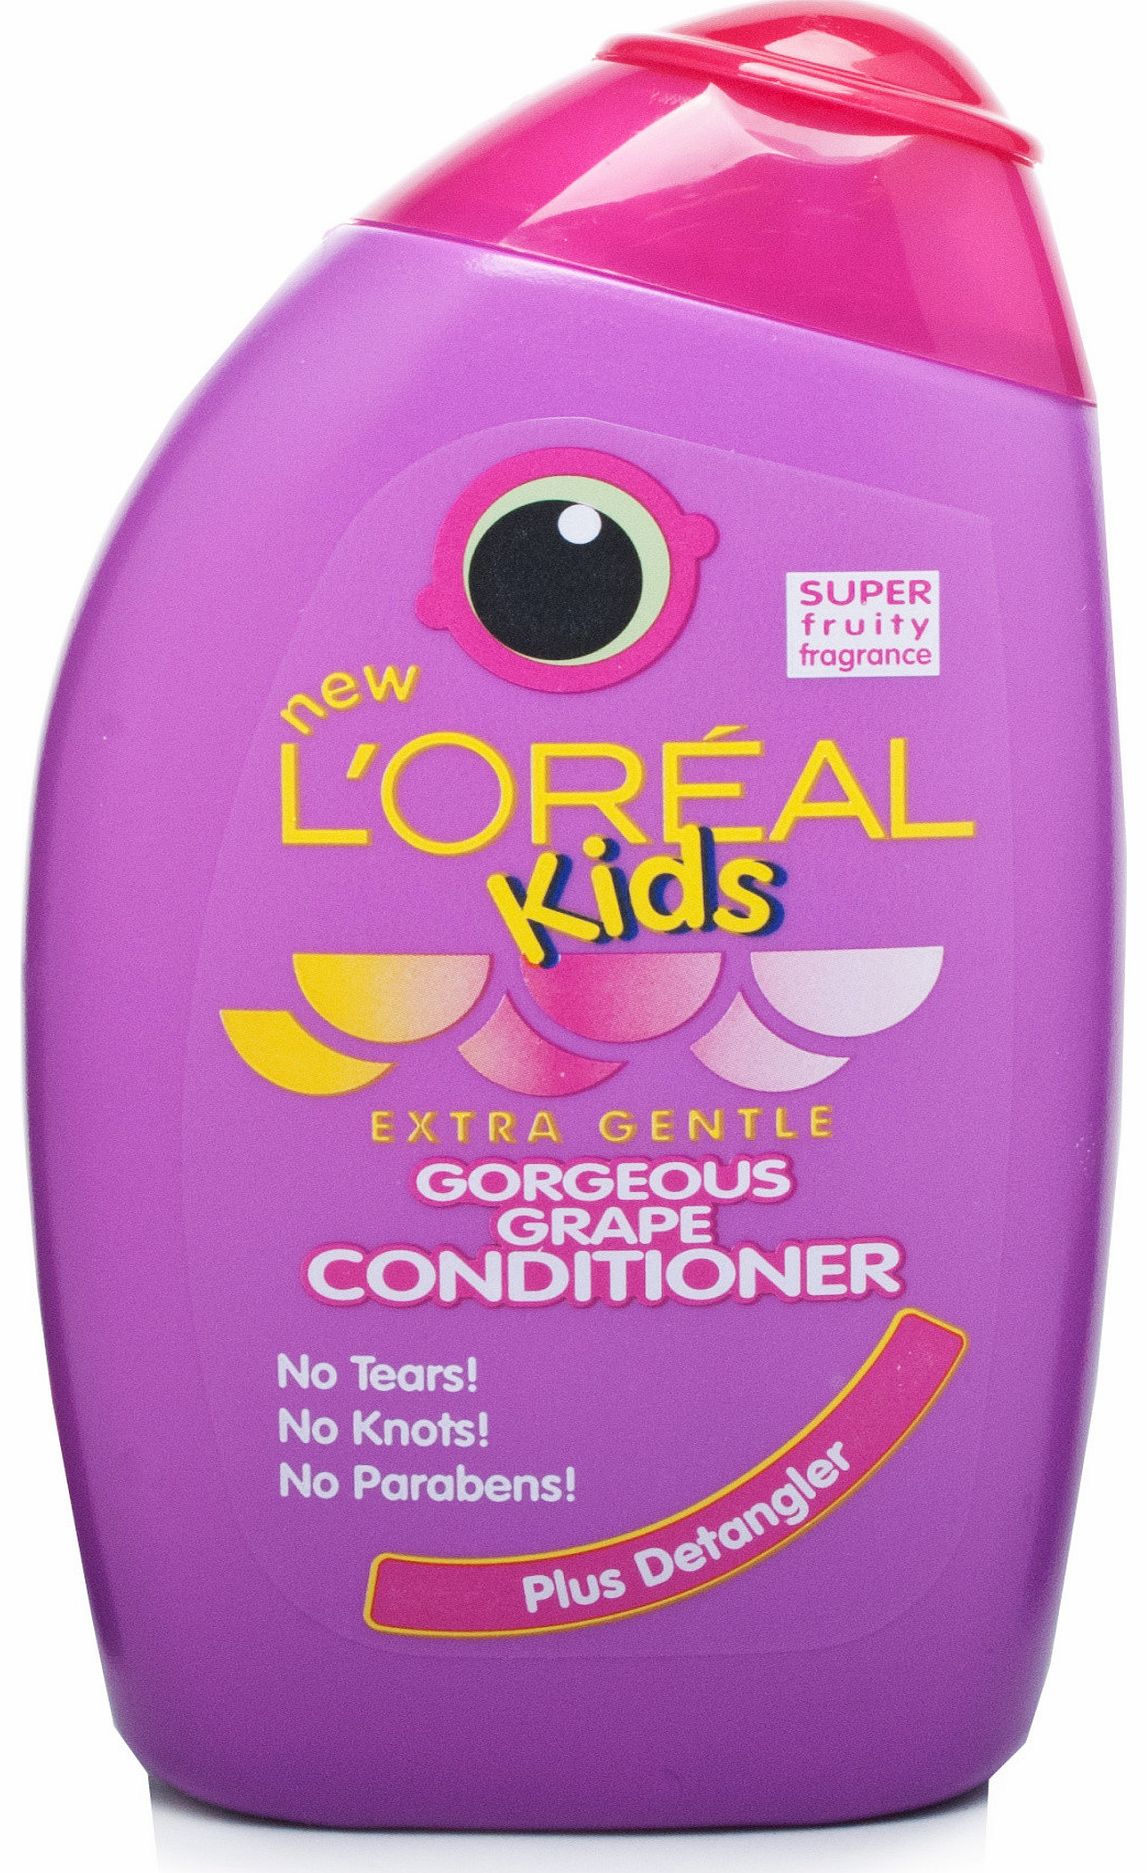 L'Oreal Kids Extra Gentle Grape Conditioner